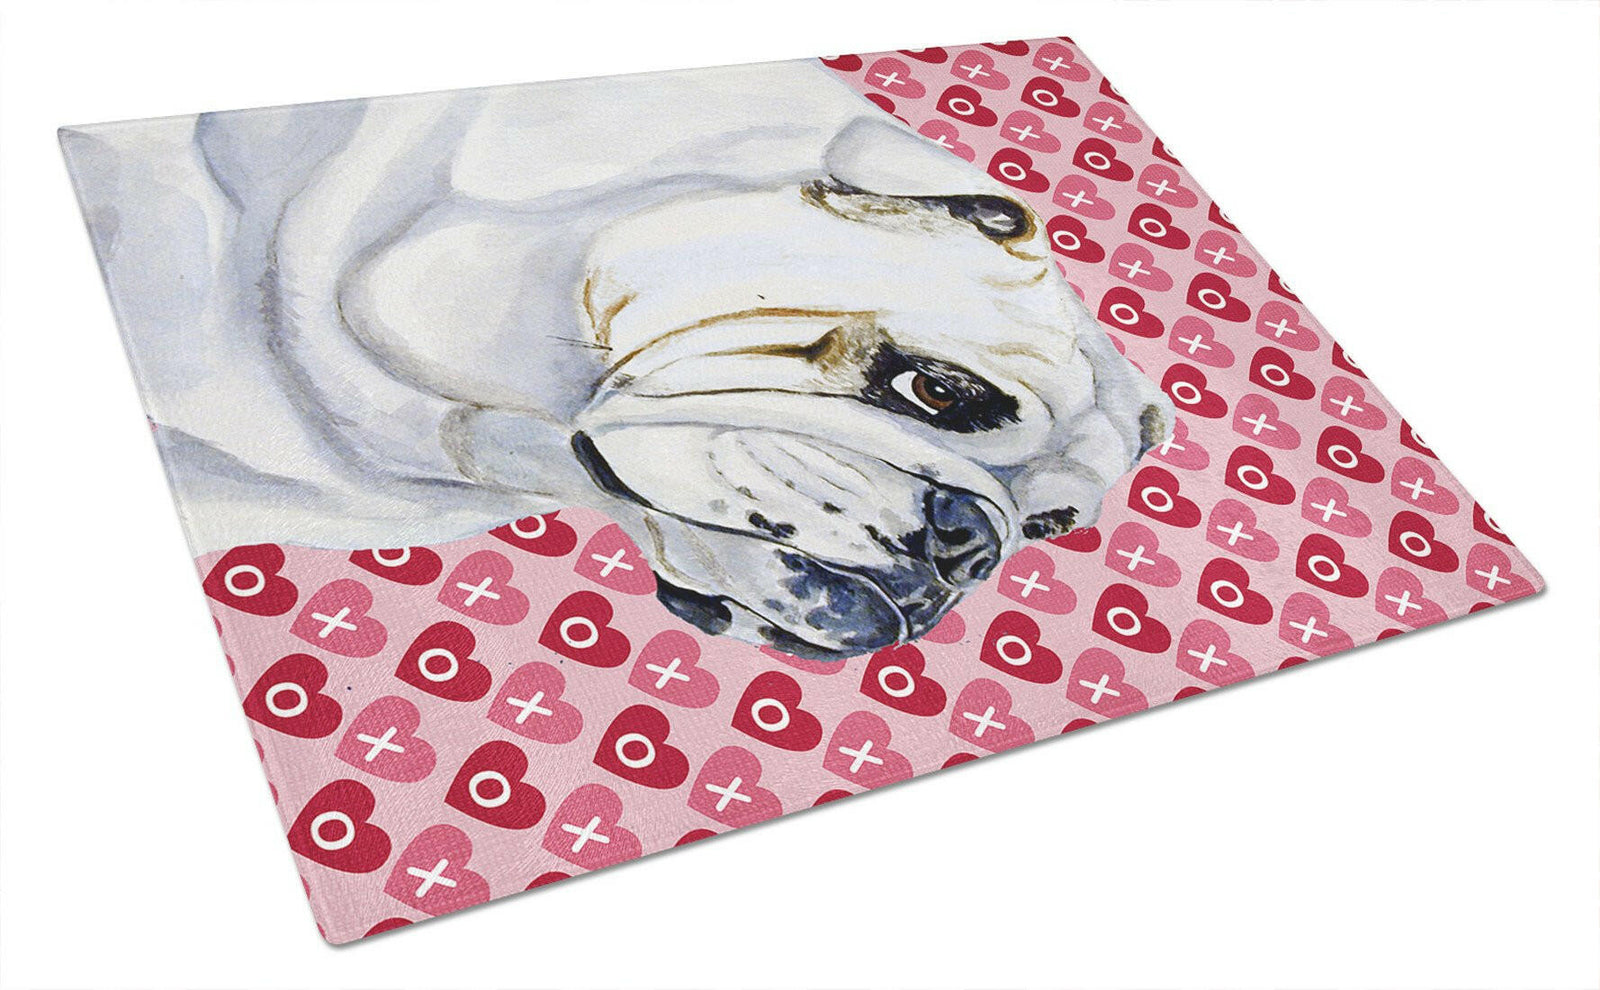 Bulldog English Hearts Love and Valentine's Day Glass Cutting Board Large by Caroline's Treasures